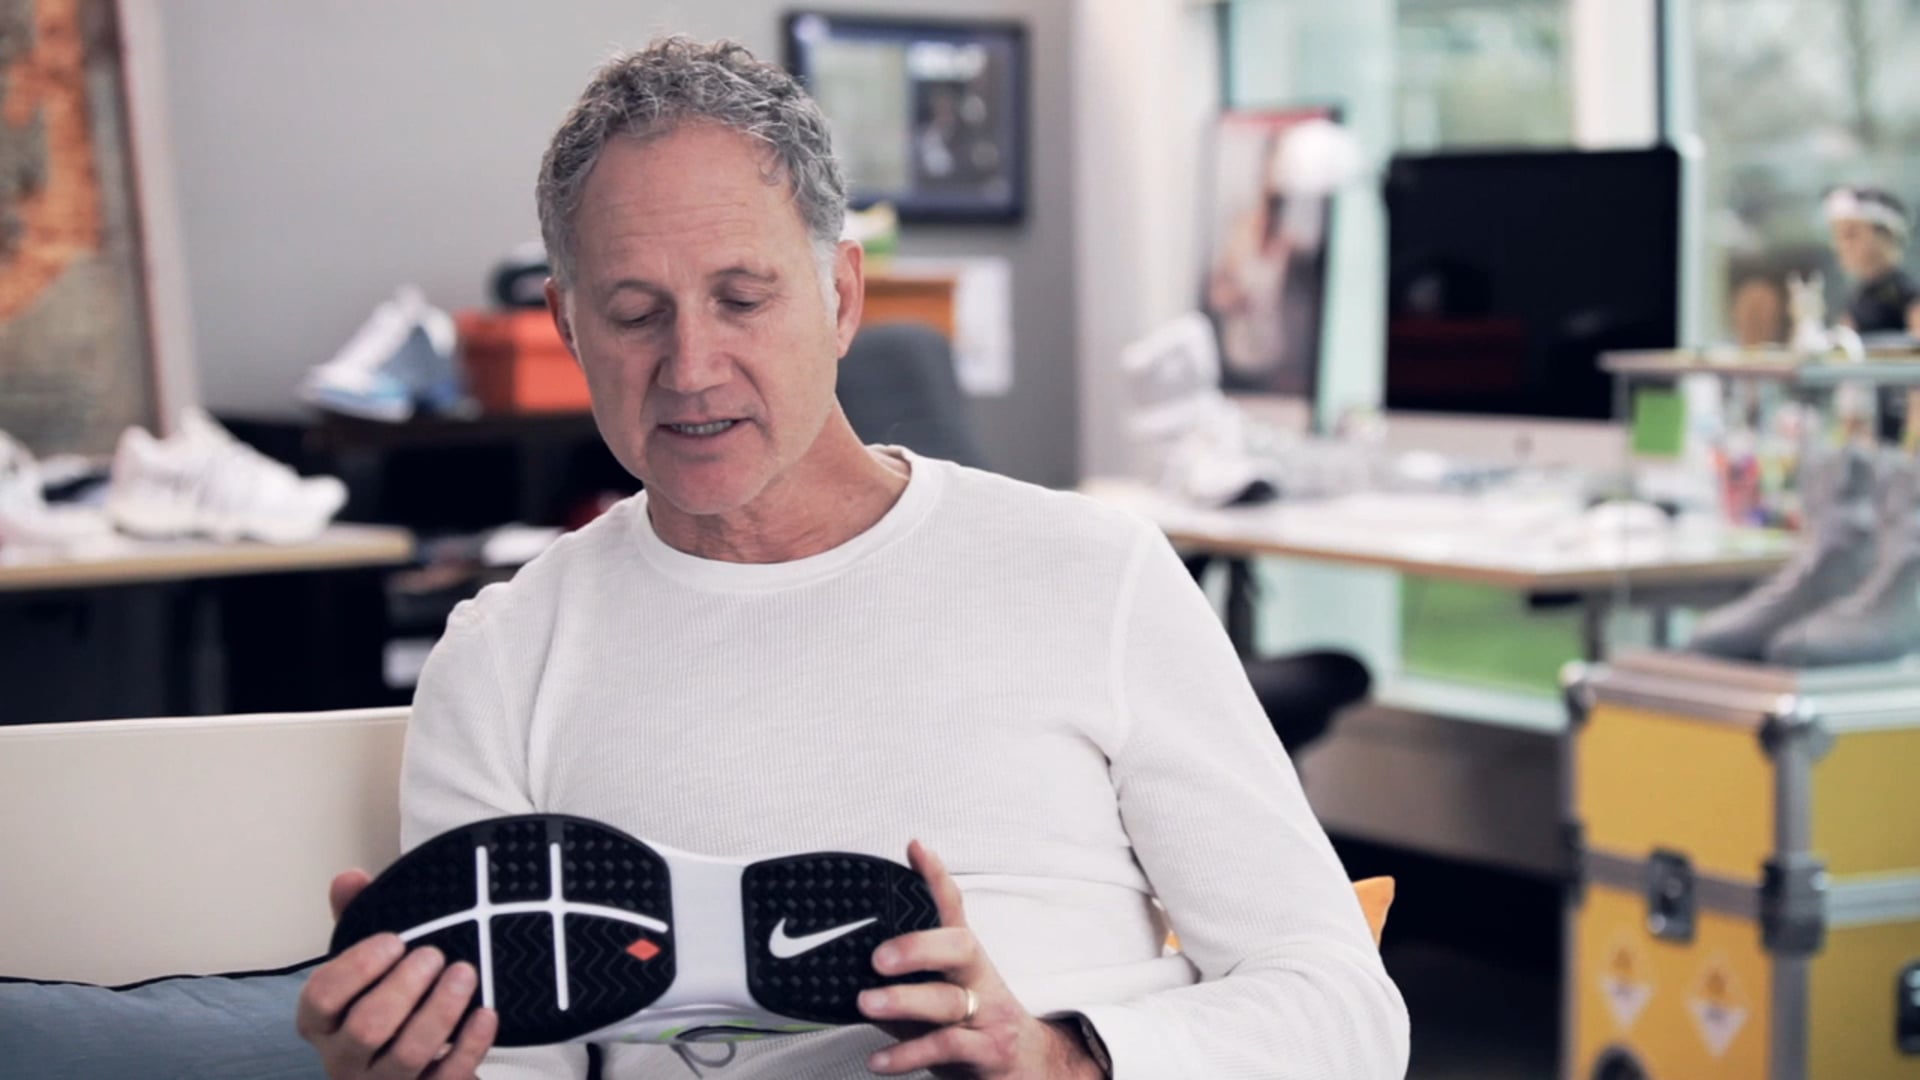 Nike - Tinker Hatfield and the design of the ZV9T for Roger Federer Agency - Mode Adjust    Role - Editor